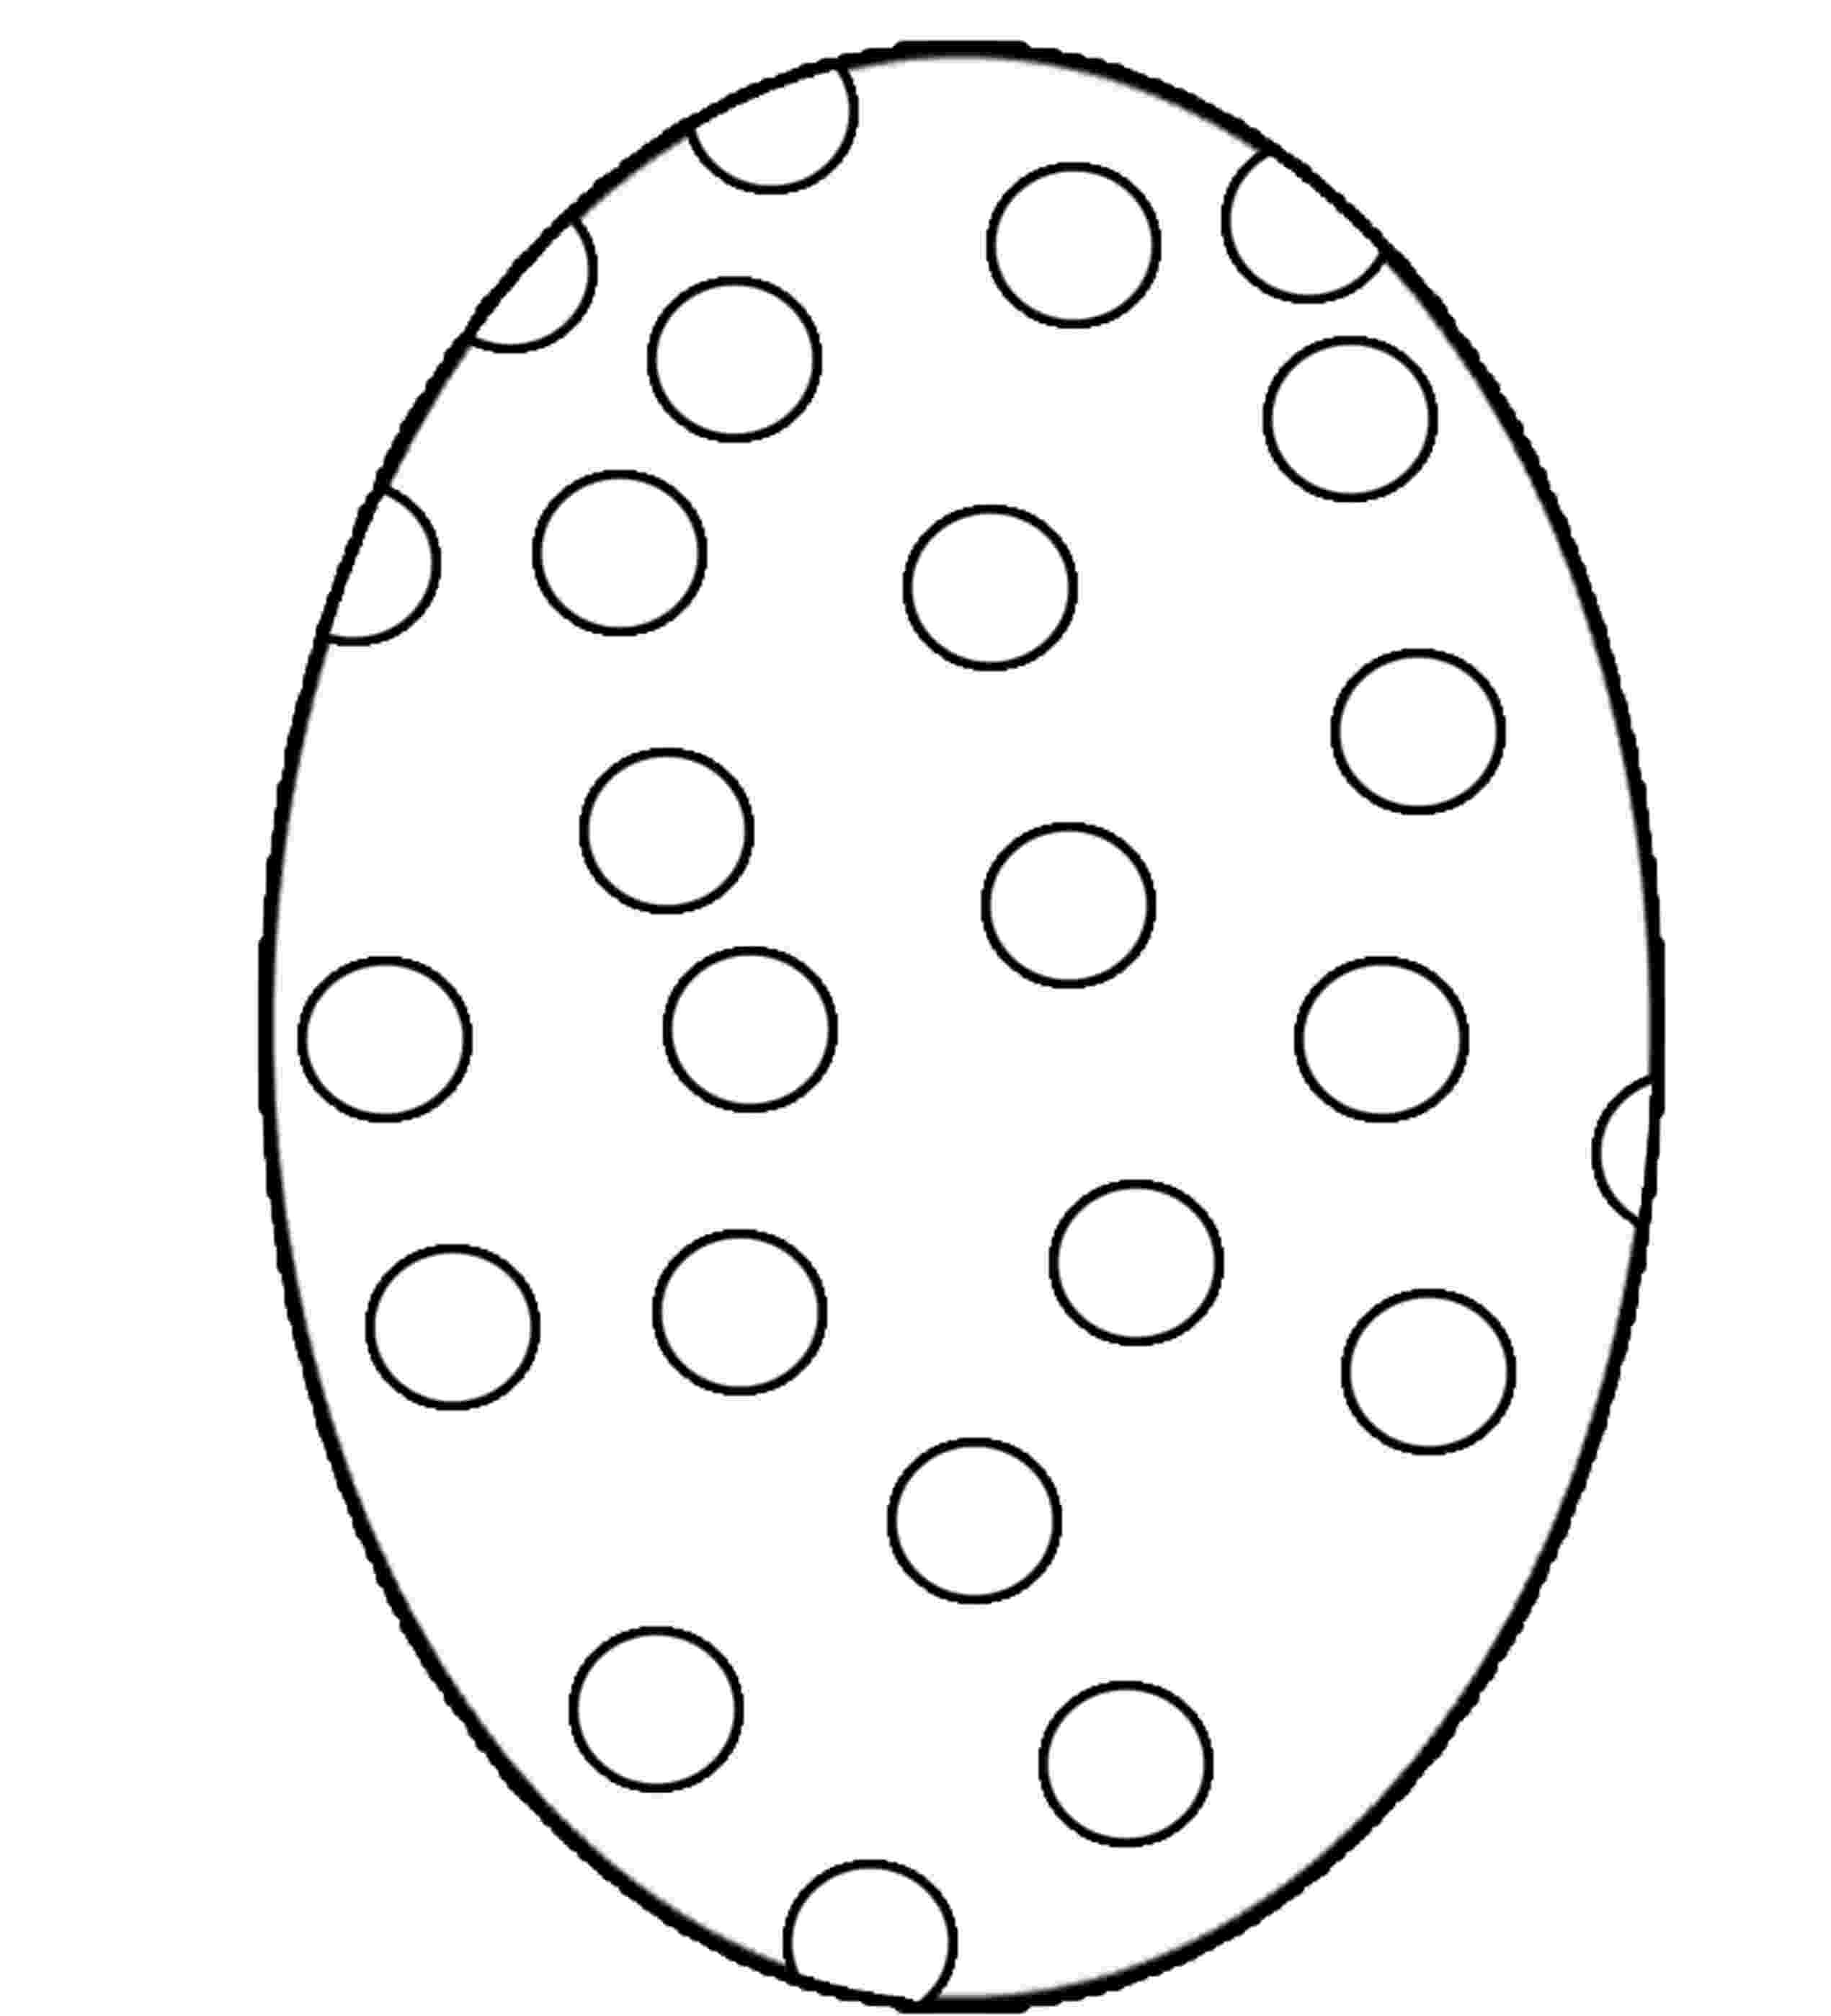 eggs coloring page easter egg coloring pages squid army page eggs coloring 